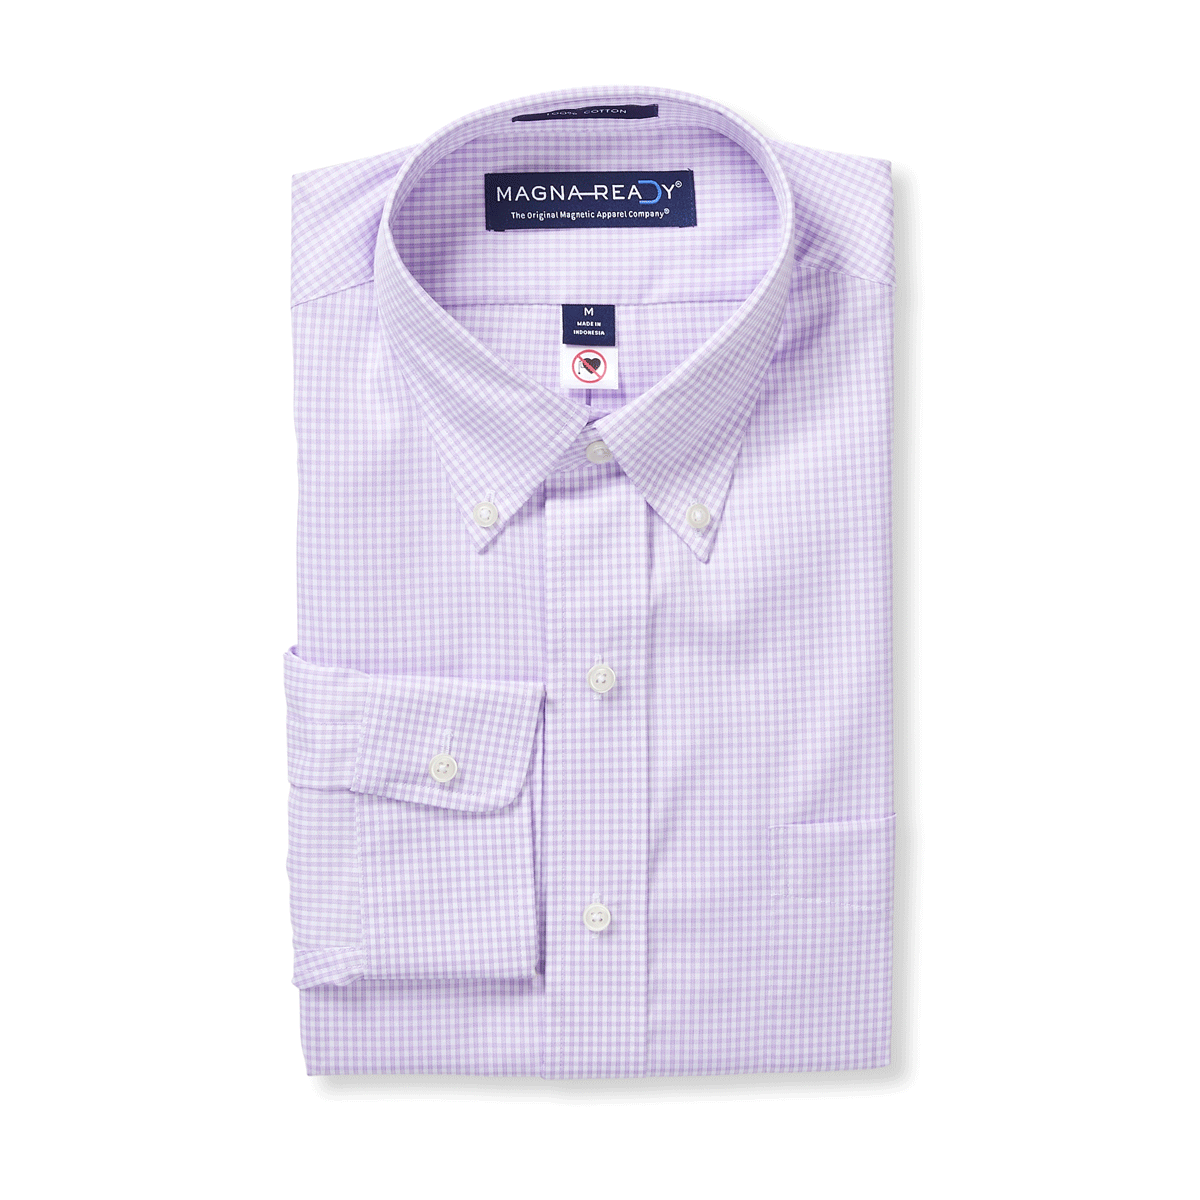 Long Sleeve Lilac and White Micro Plaid Button Down Shirt With Magneti